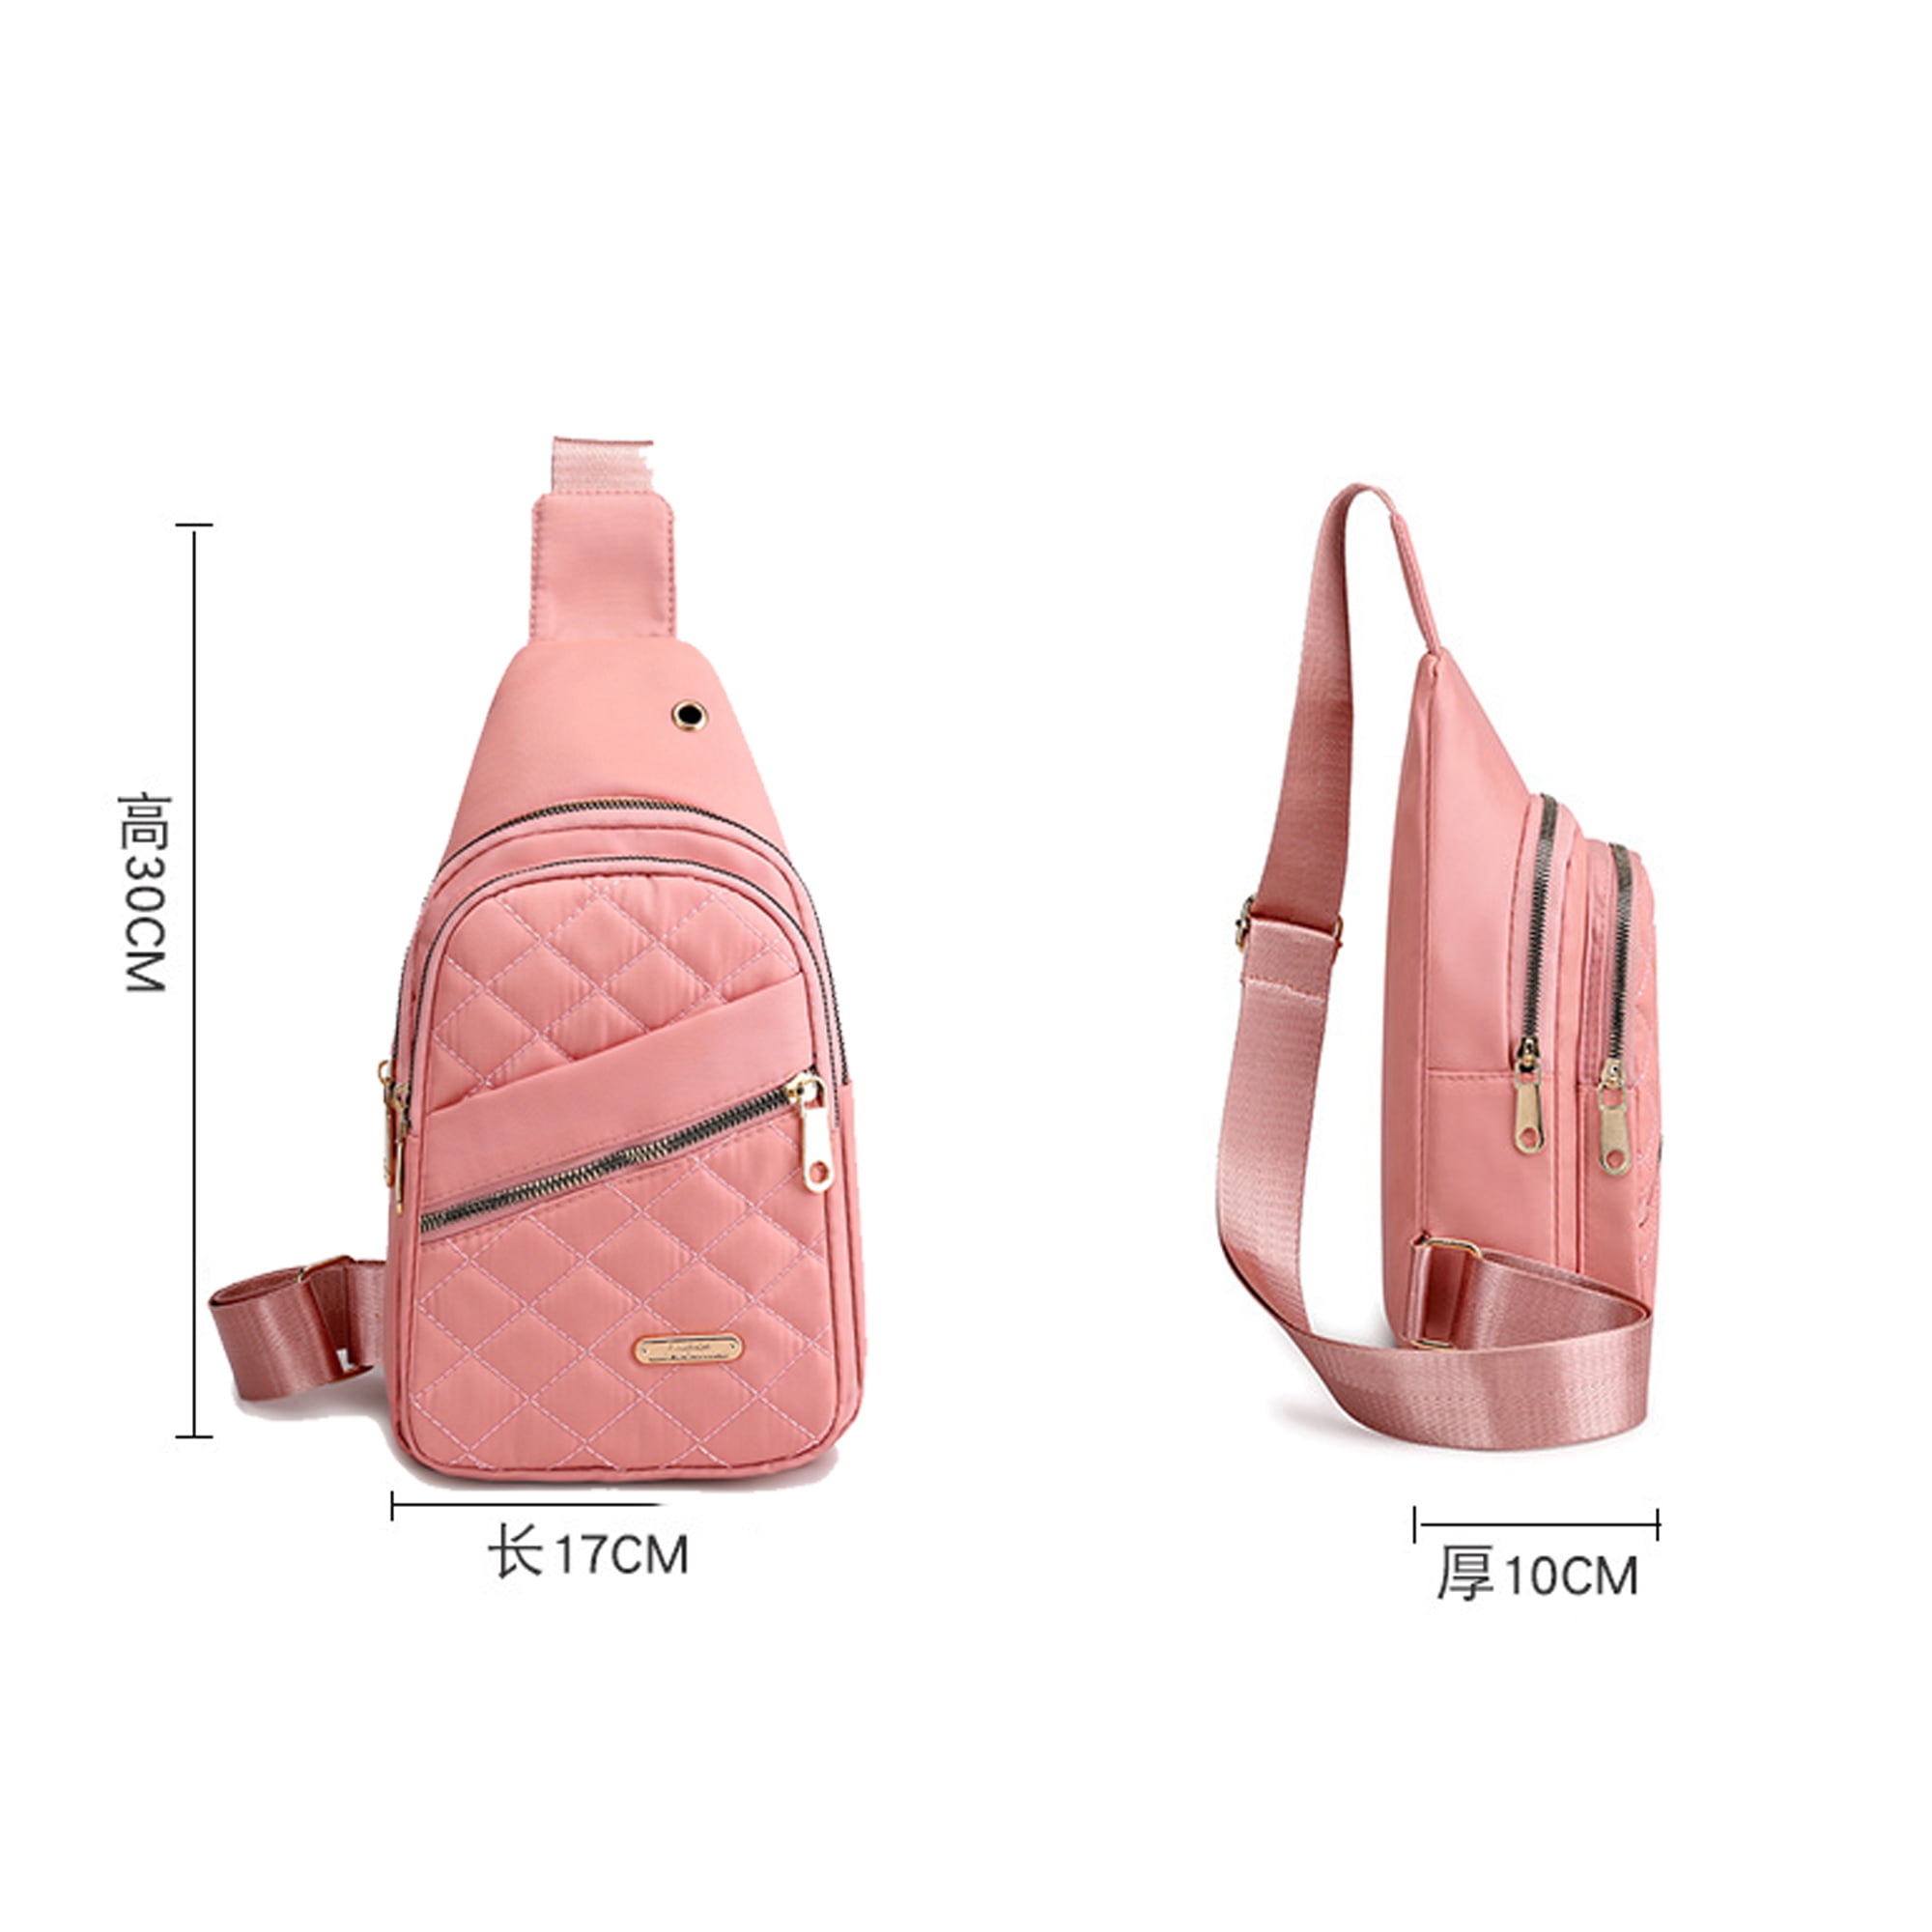 Bags for Women Newly Wax Skin Women Chest Pack Female Sling Bags